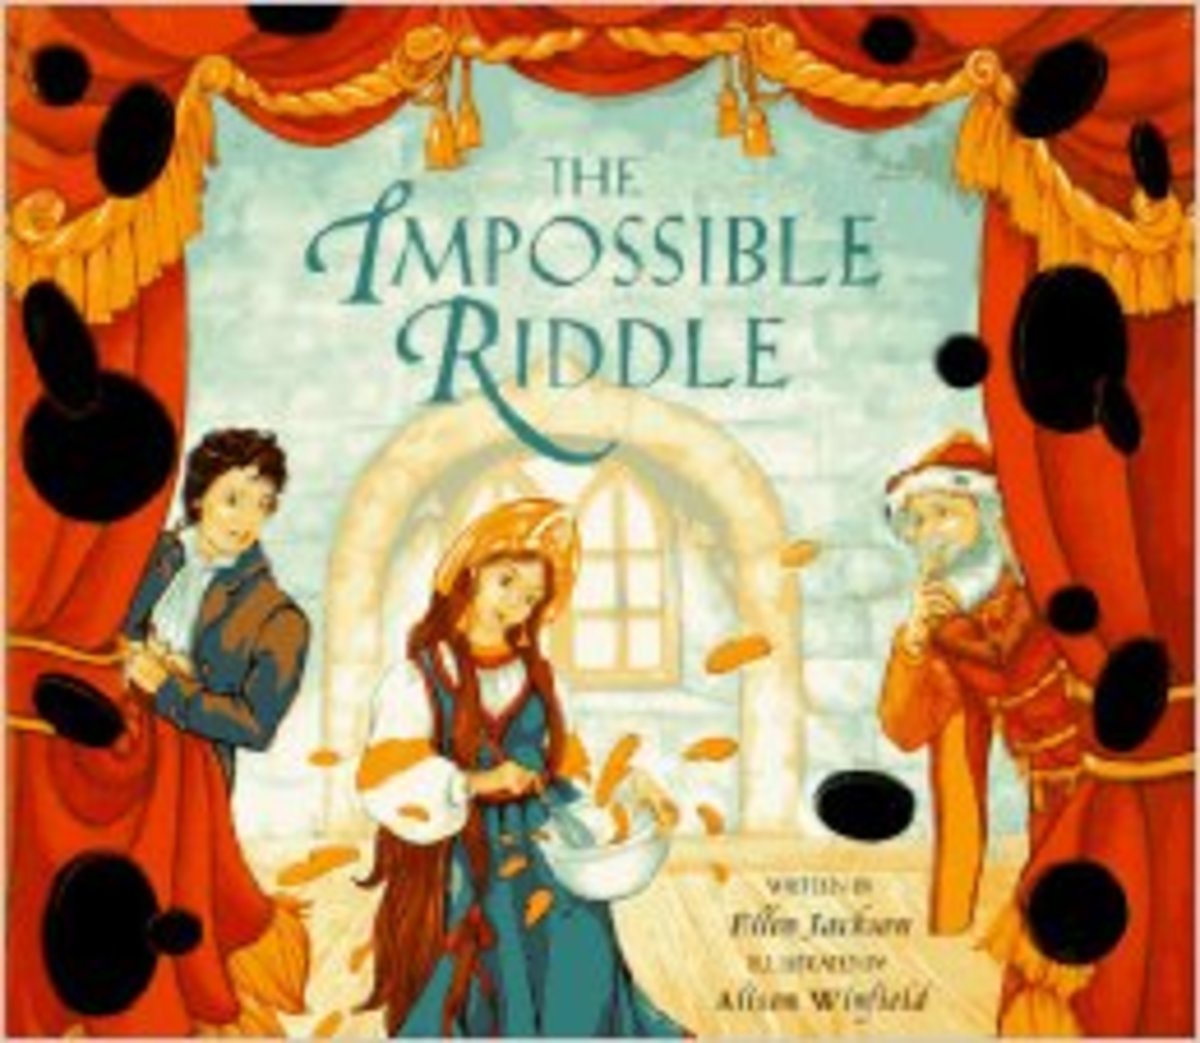 The Impossible Riddle by Ellen B. Jackson